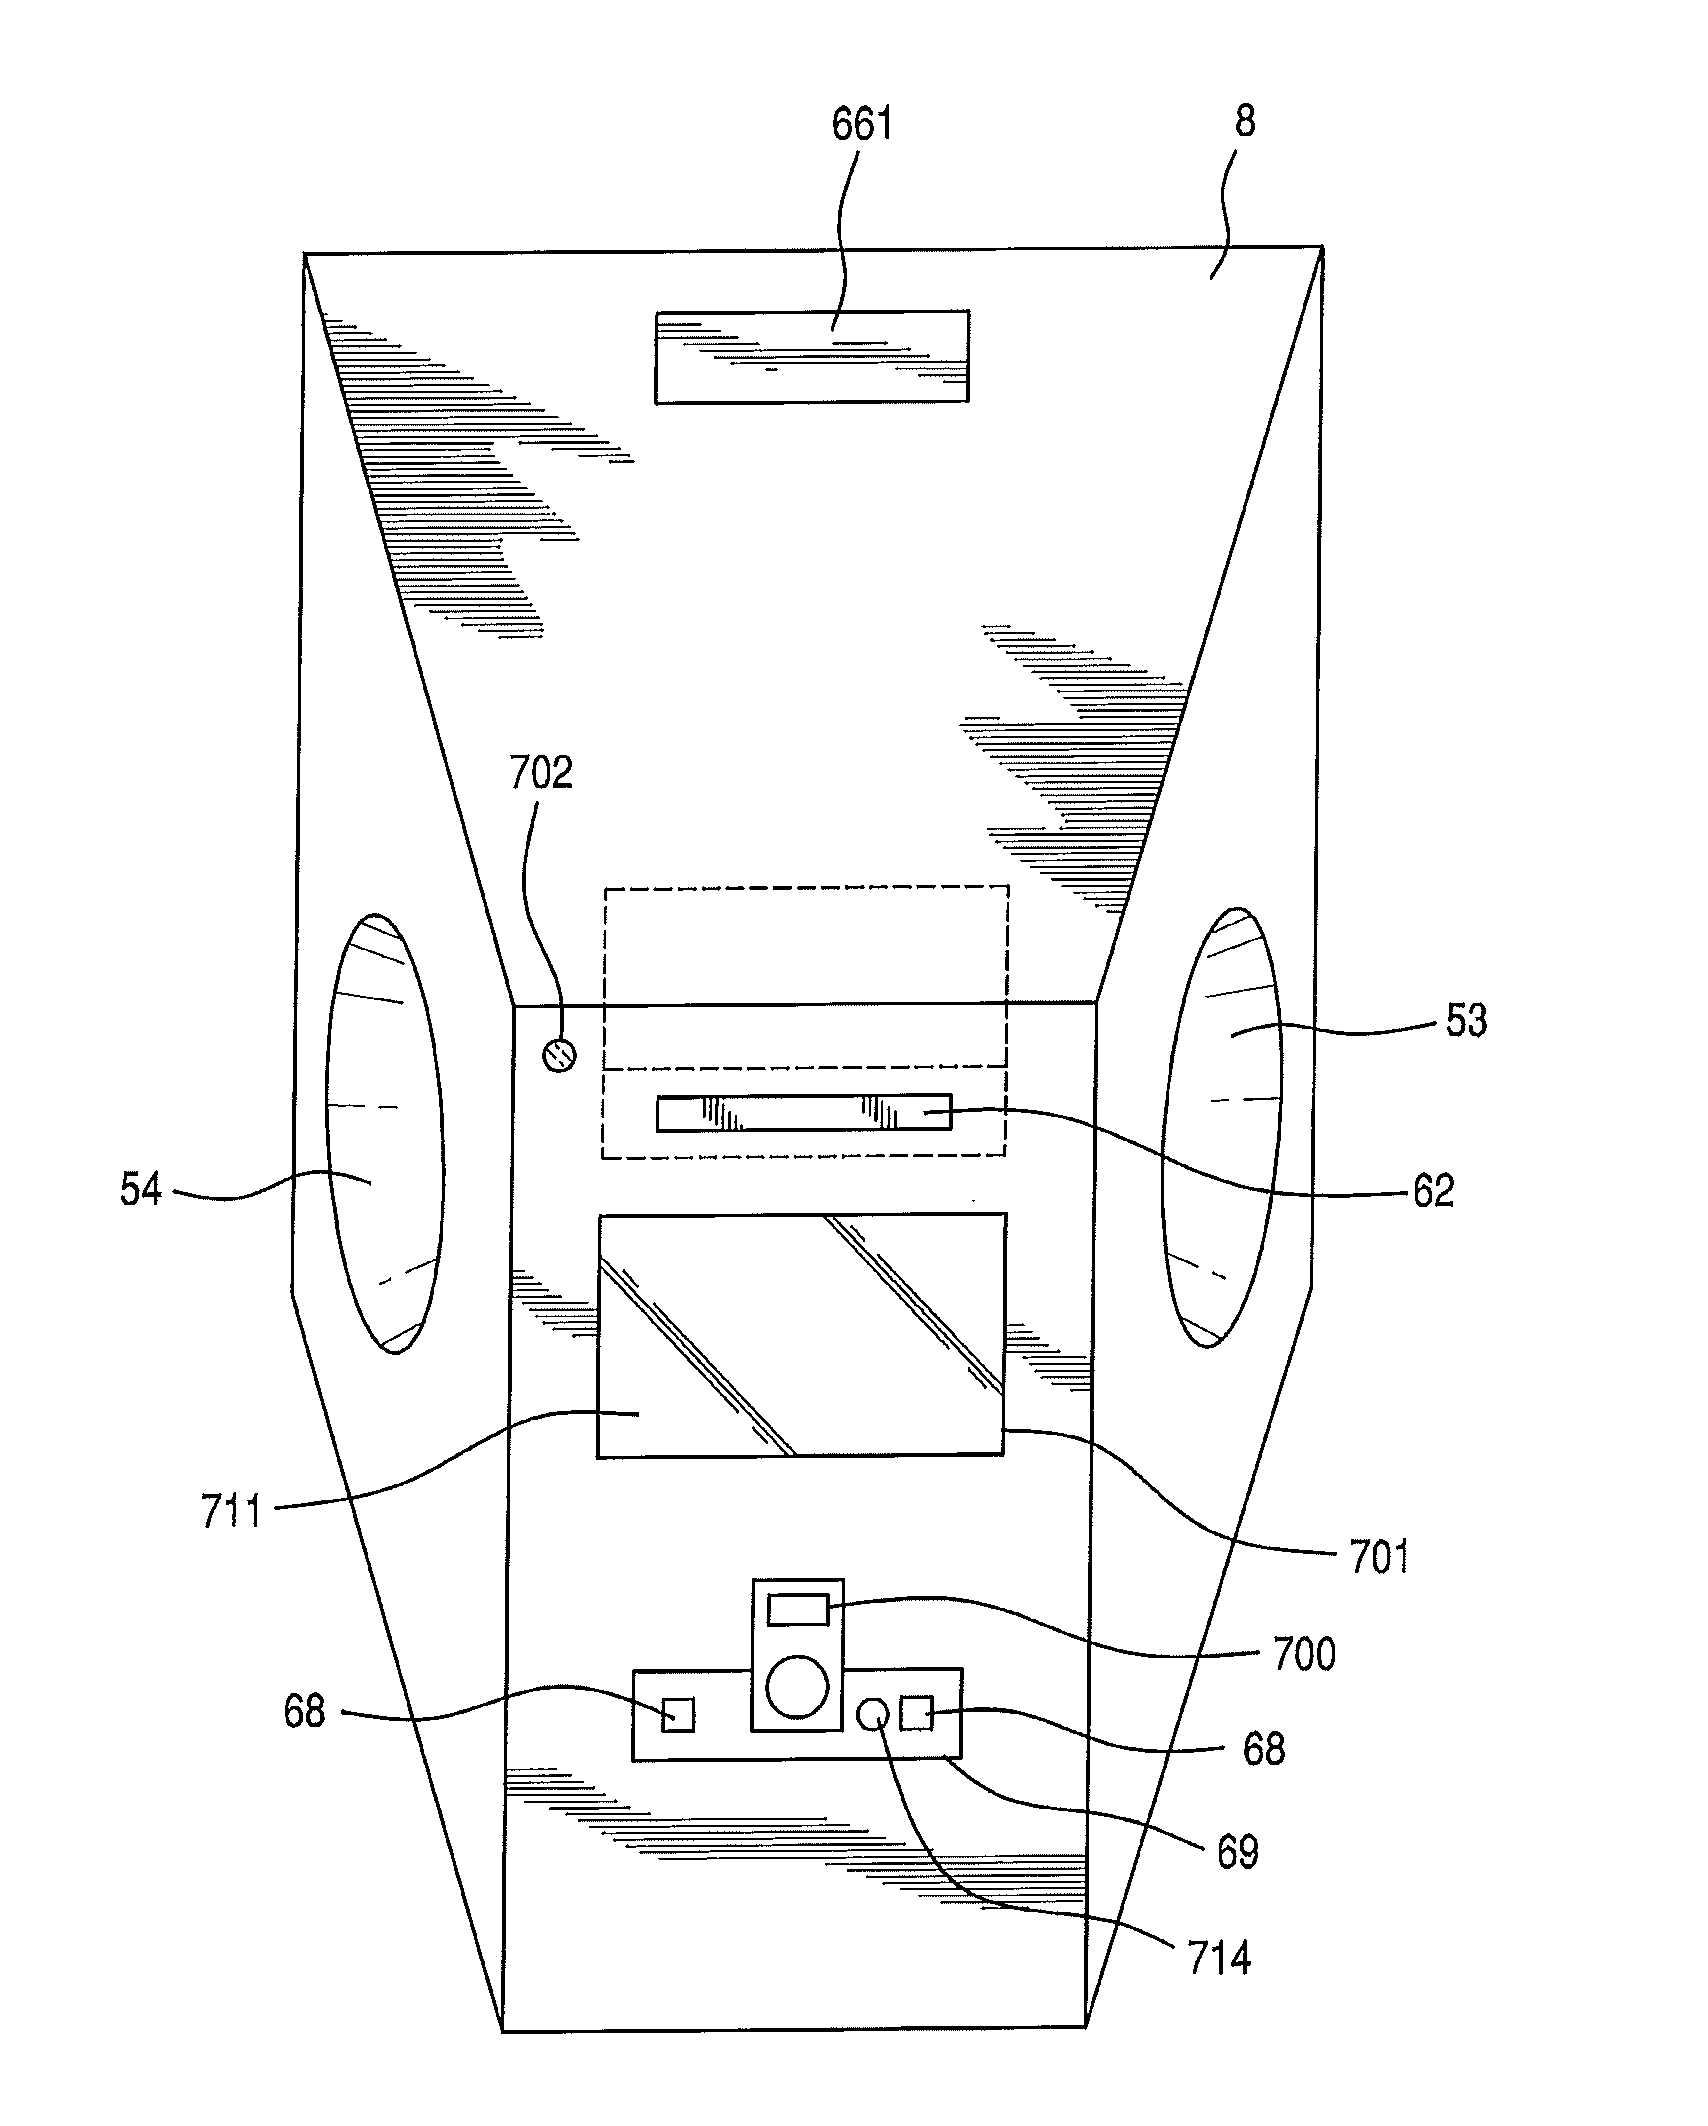 Multi-channel loudspeaker enclosure with laterally projecting wings and method for orienting and driving multiple loudspeakers